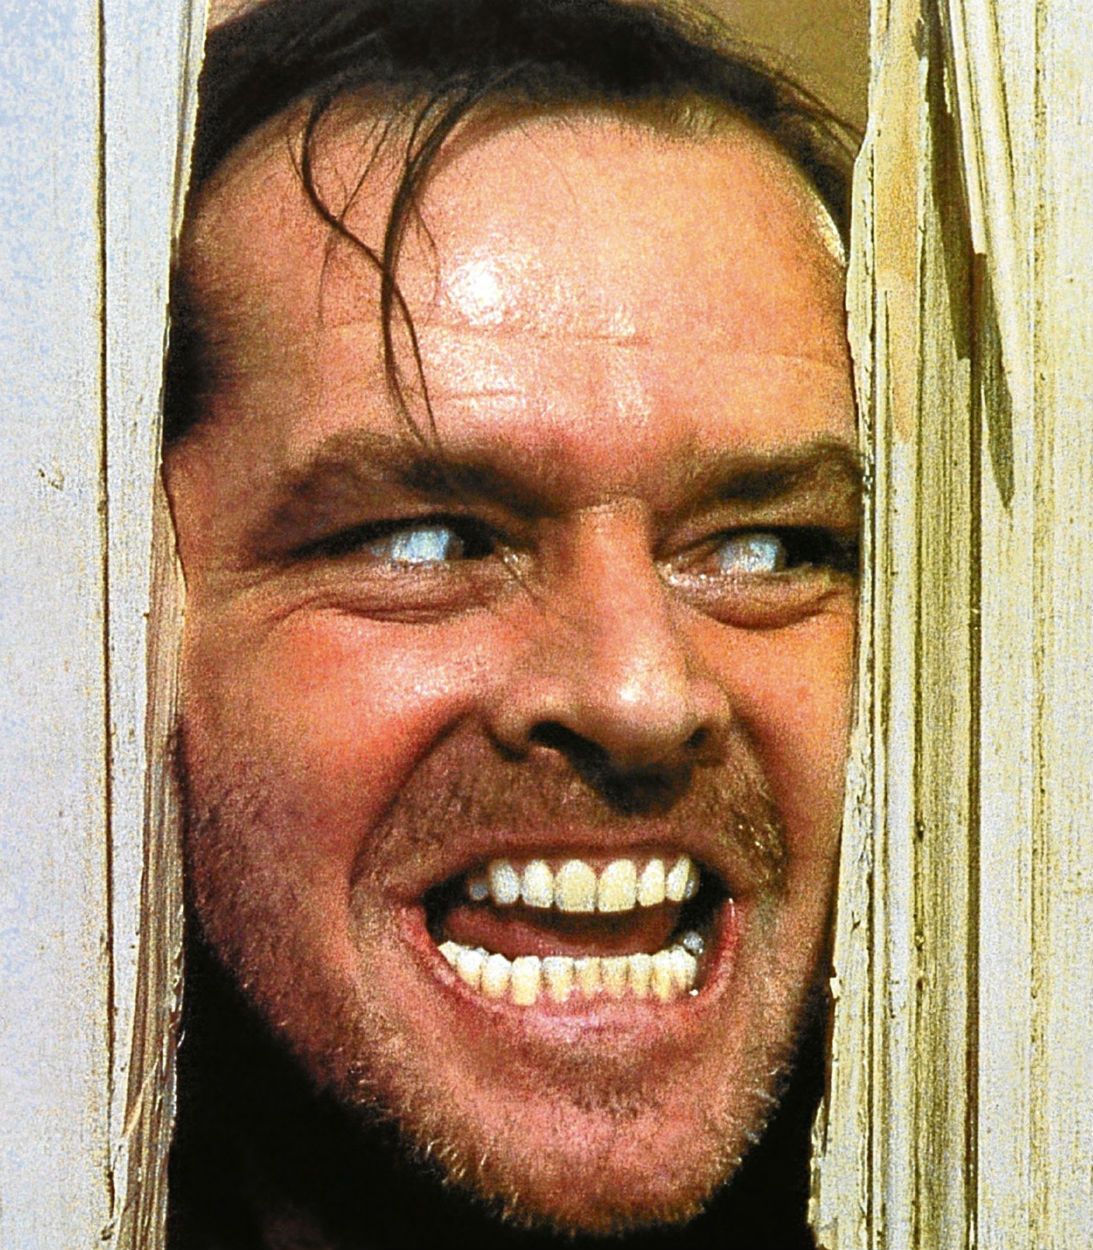 Jack Nicholson in The Shining Vertical